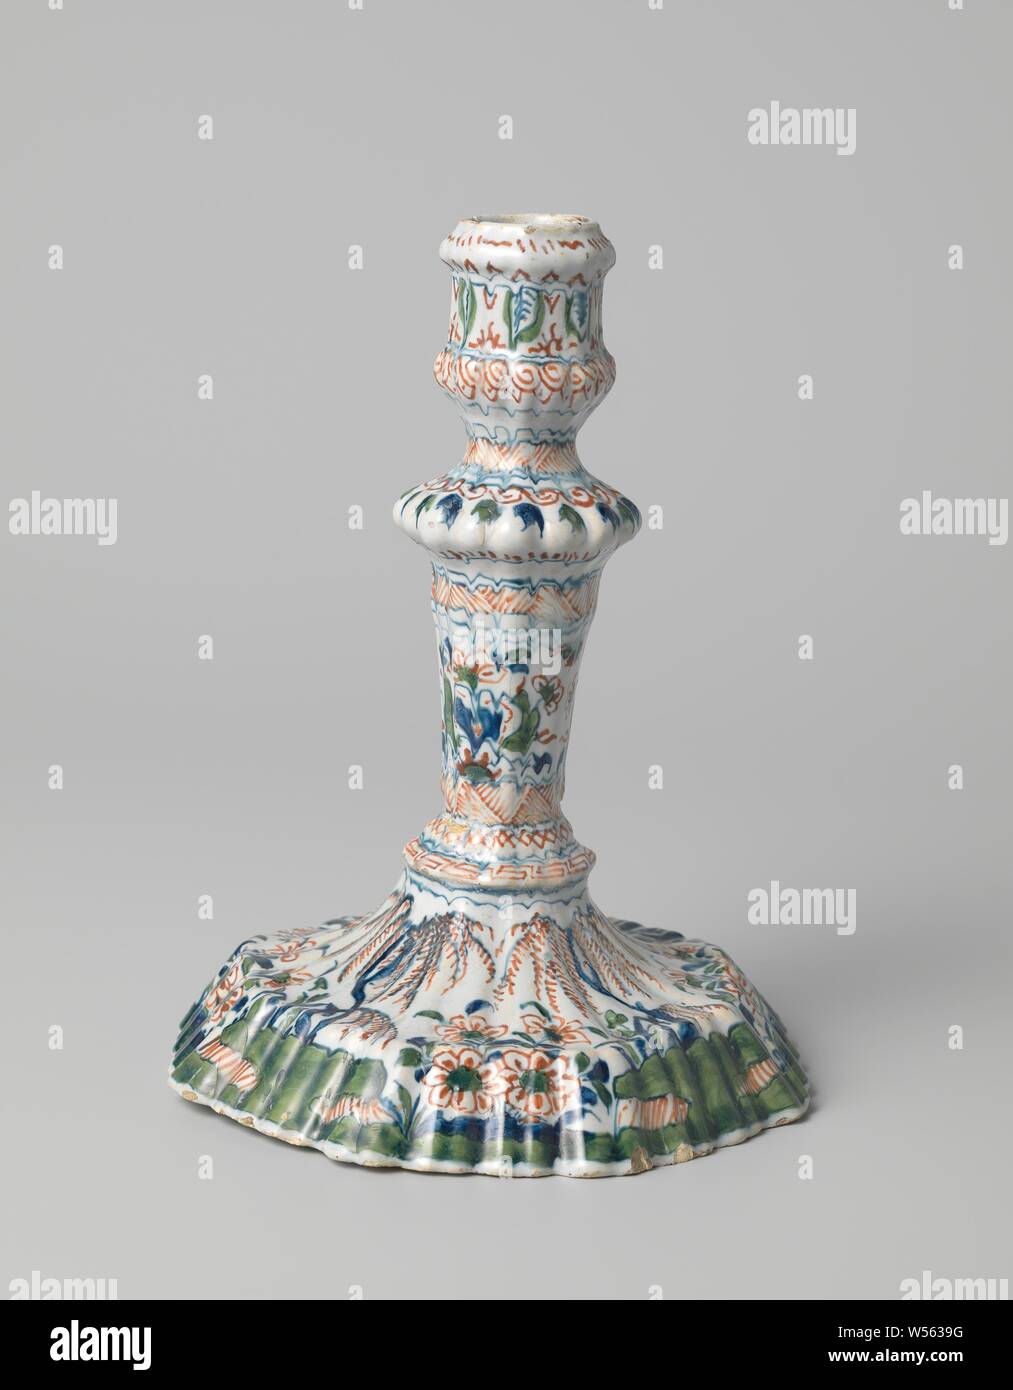 Candlestick with multicolored painting, Candlestick of faience, multicolored painted under the glaze. Octagonal foot, fluted trunk. Unnoticed., anonymous, Delft, c. 1690, h 19 cm × d 14 cm Stock Photo